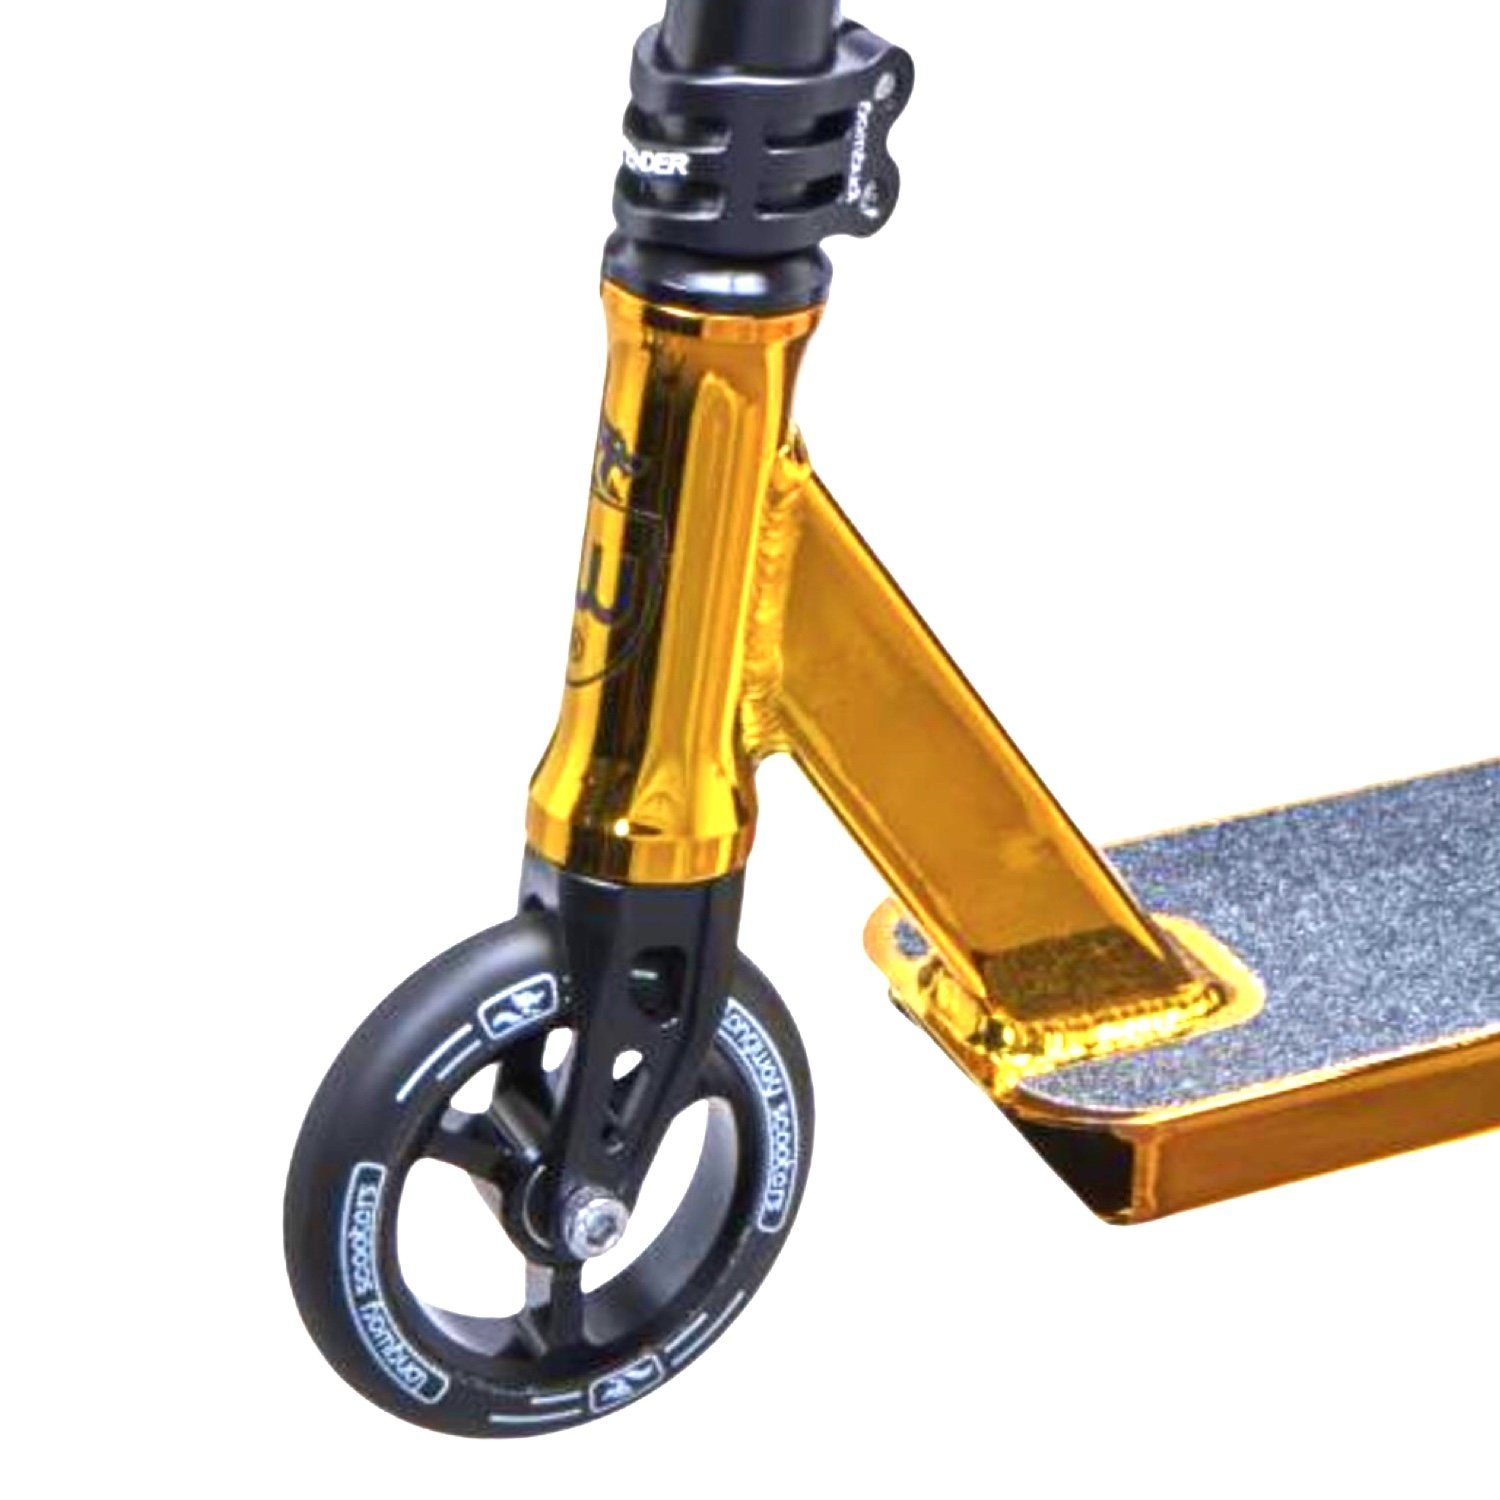 Longway Scooters Stuntscooter Metro Stunt-Scooter Longway Shift Topaz H=84cm